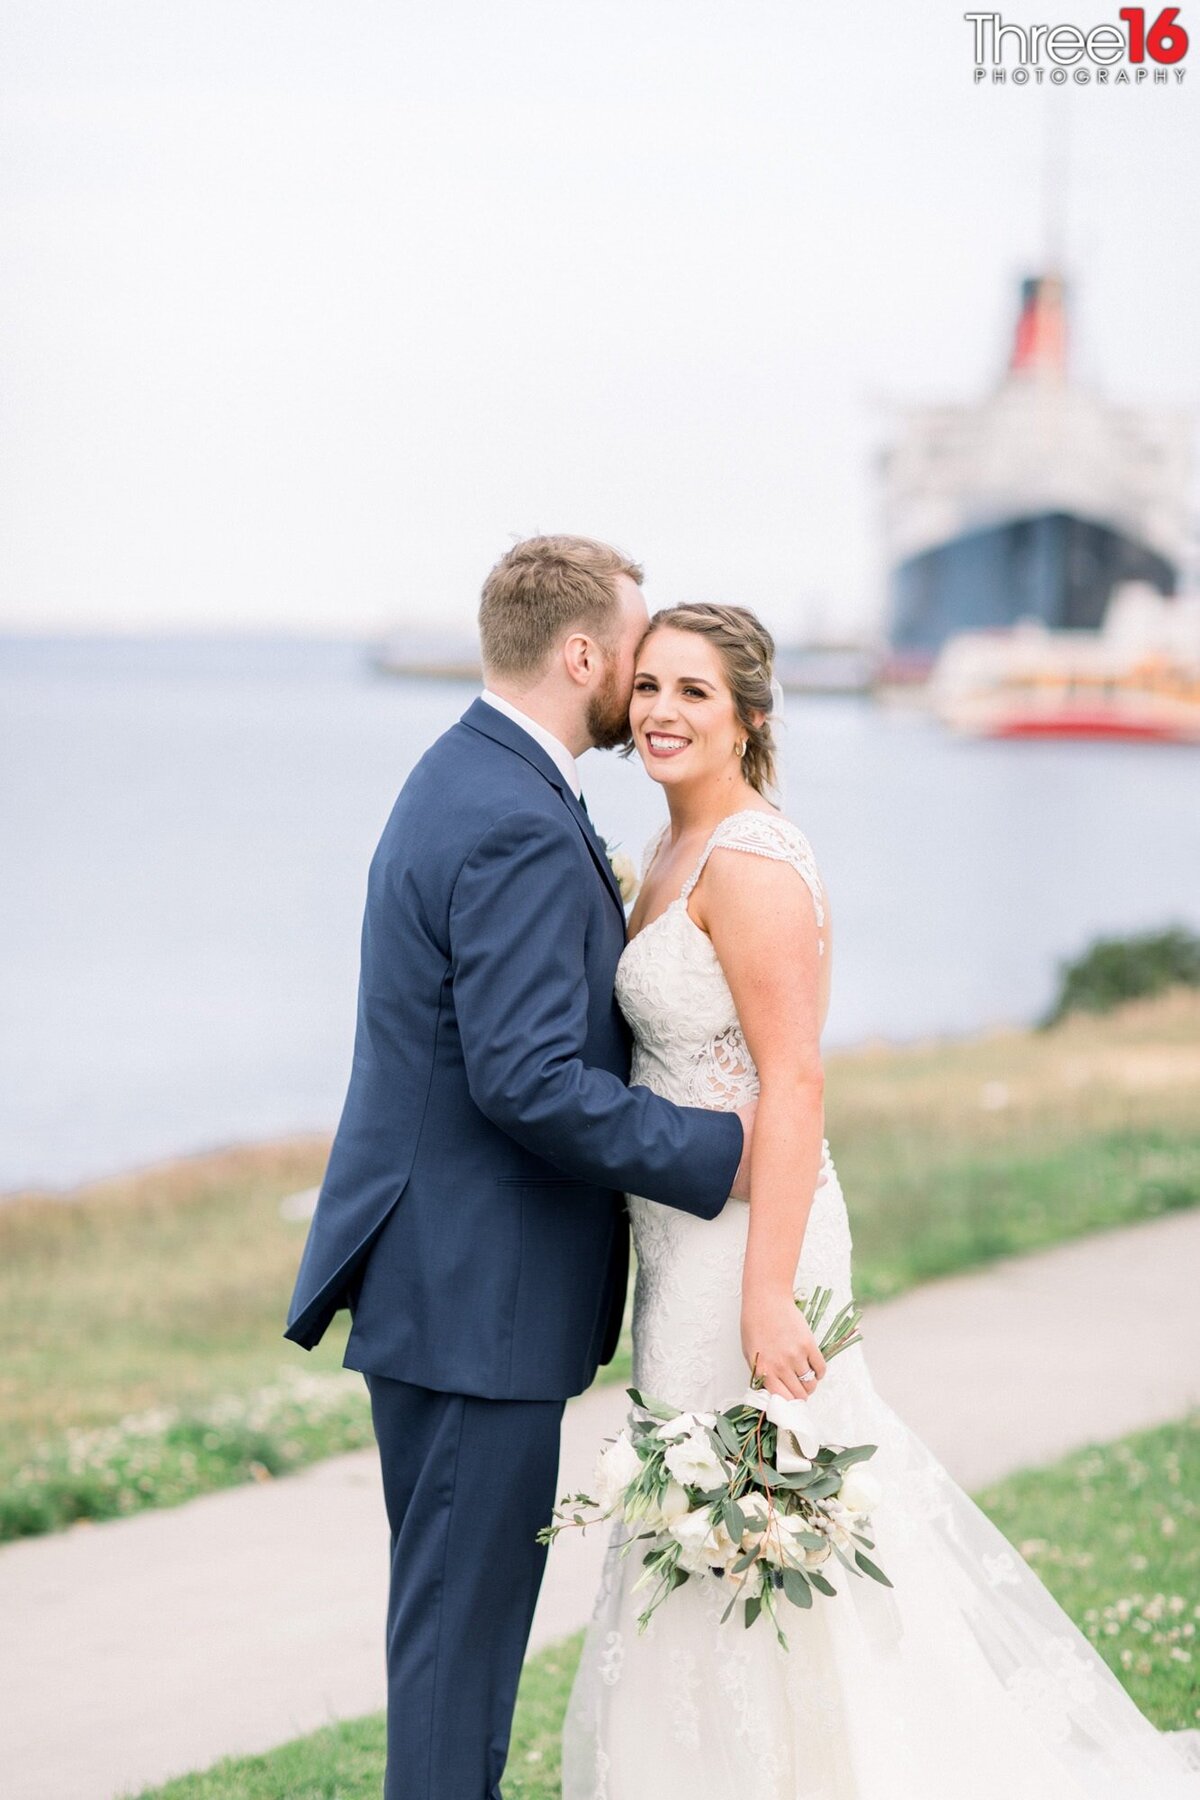 Groom embraces his Bride as she smiles at the wedding photographer with the Queen Mary in the background